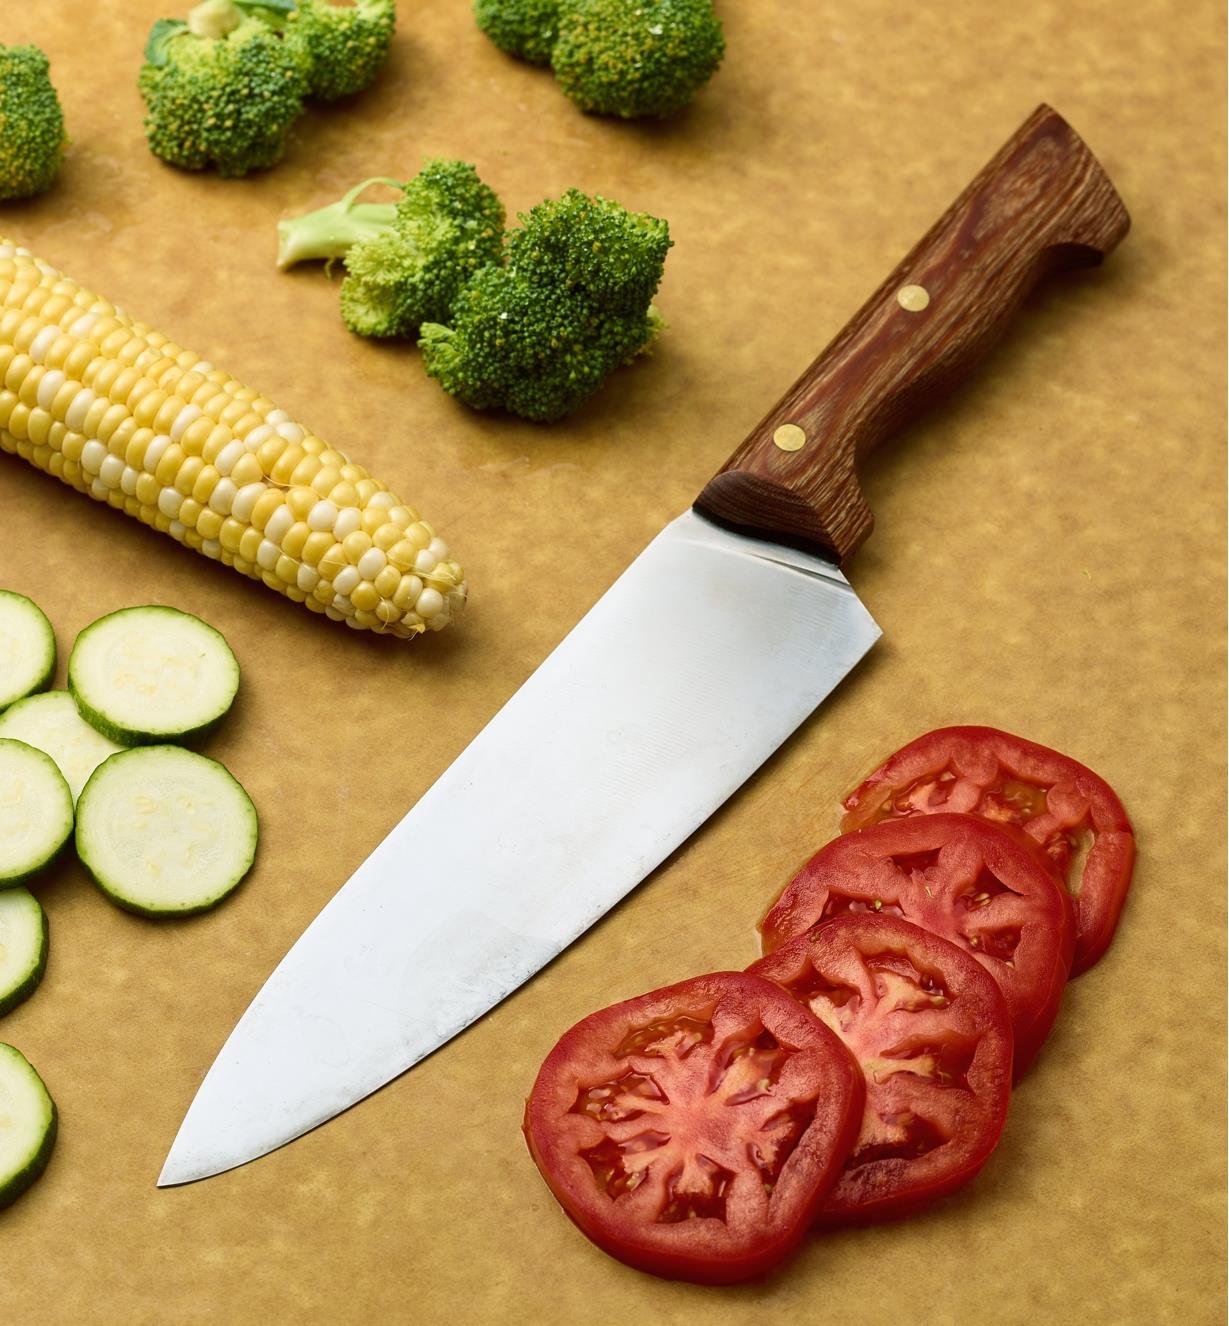 A large chef’s knife used to cut vegetables